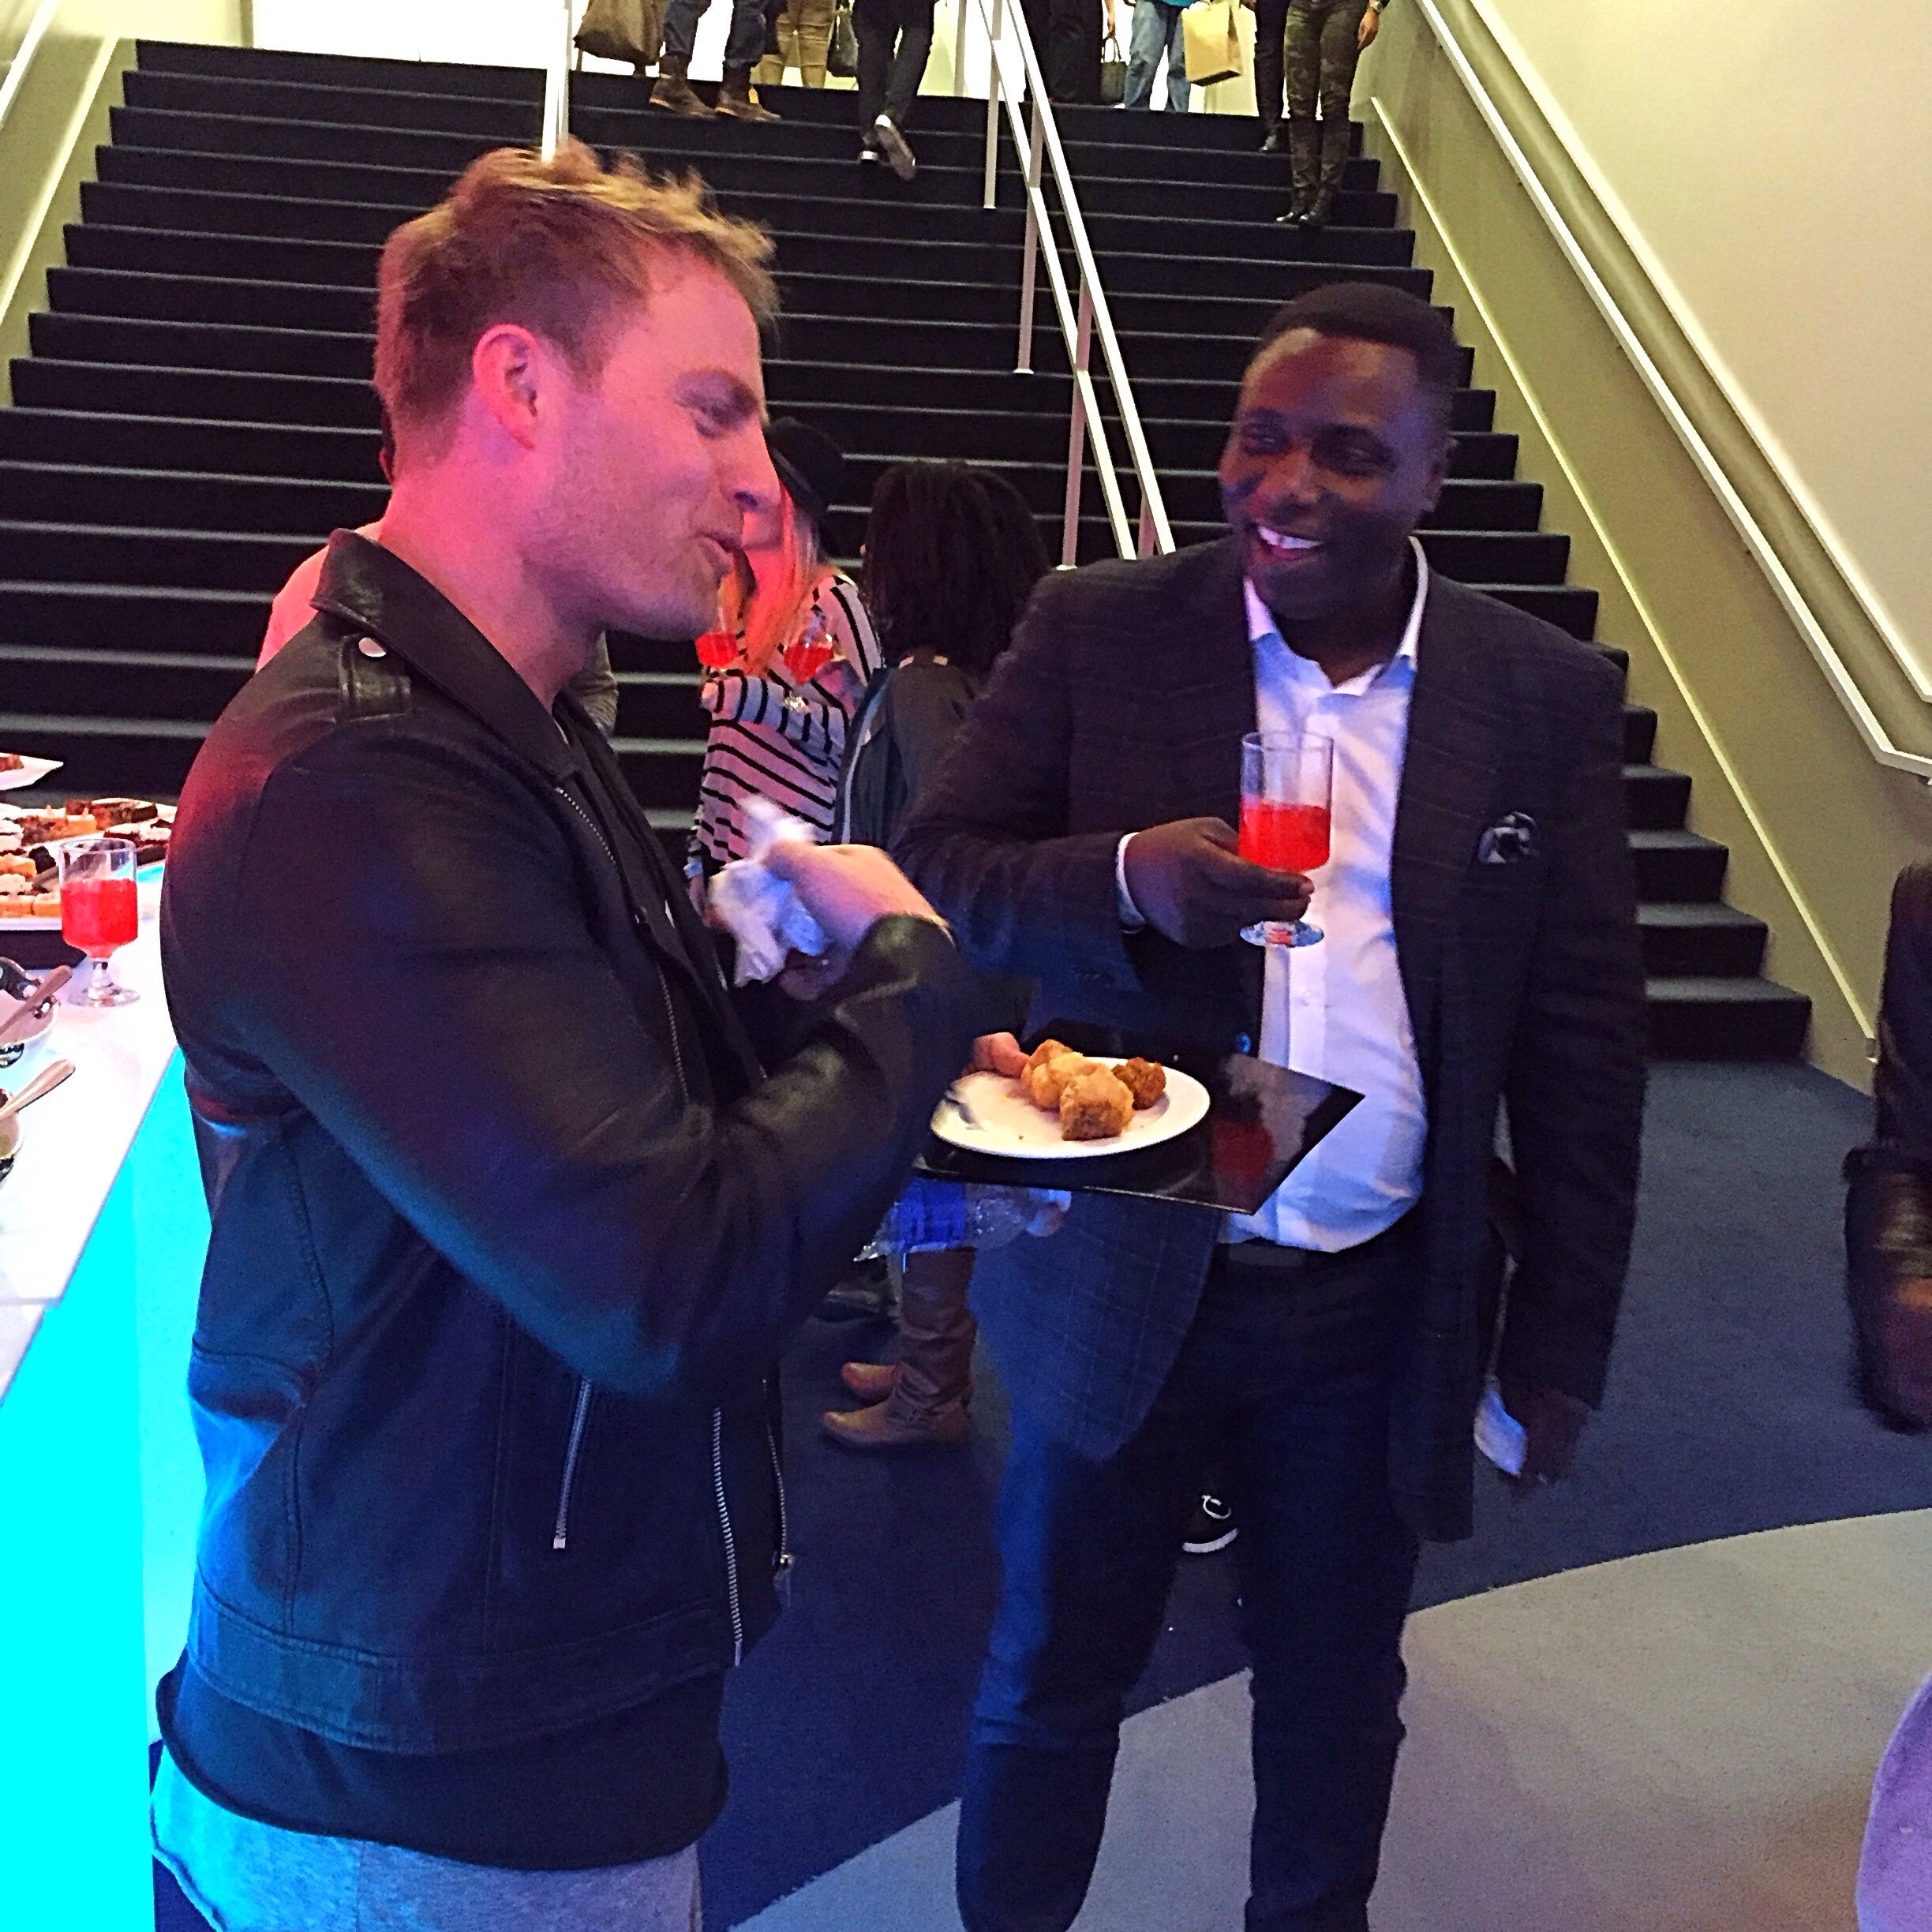 Transforming Life Centre On Twitter: "Pastor Ralph Dartey Sharing In The Joy Of The Lord With Pastor Nick Nilson Of Lakewood Church. #Honoured & #Blessed. Https://T.co/T3Obcke0Op" / Twitter